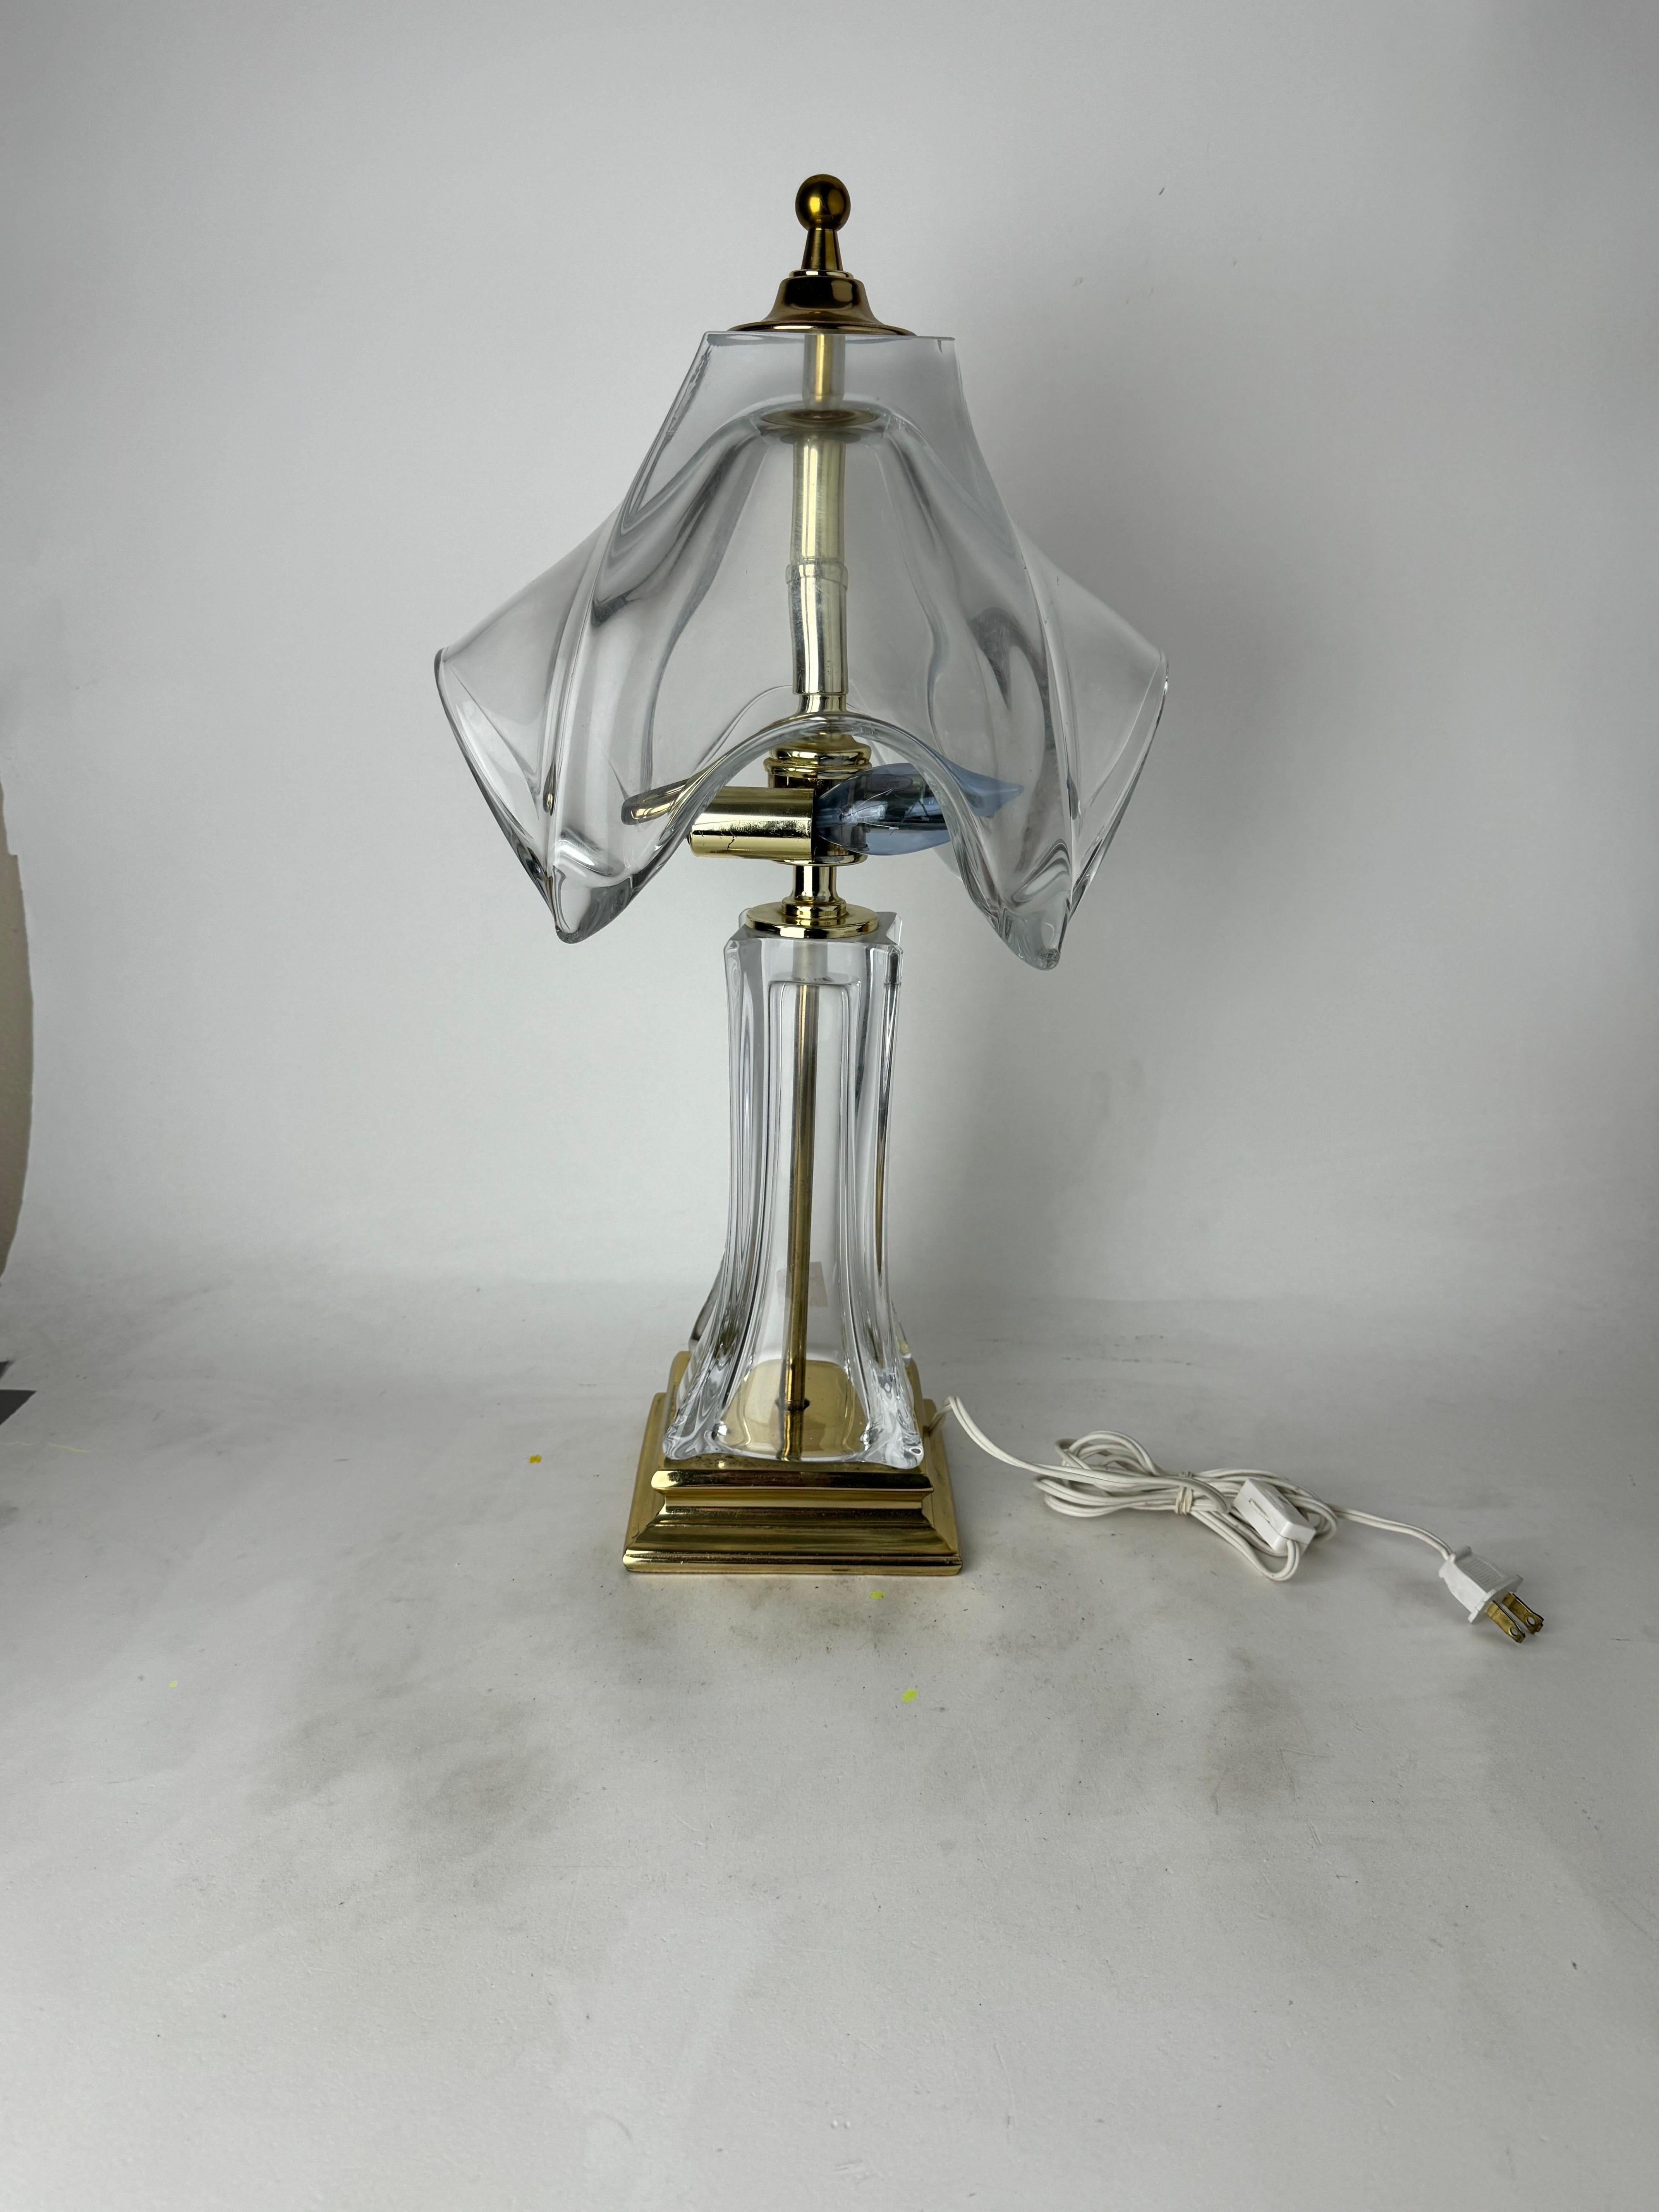 Gorgeous handblown crystal art glass table lamp with brass base, center and top, presumably by Cofrac in France. This item is unmarked, but Cofrac tags their items with labels, which are often taken off by customers after purchase for looks.

This